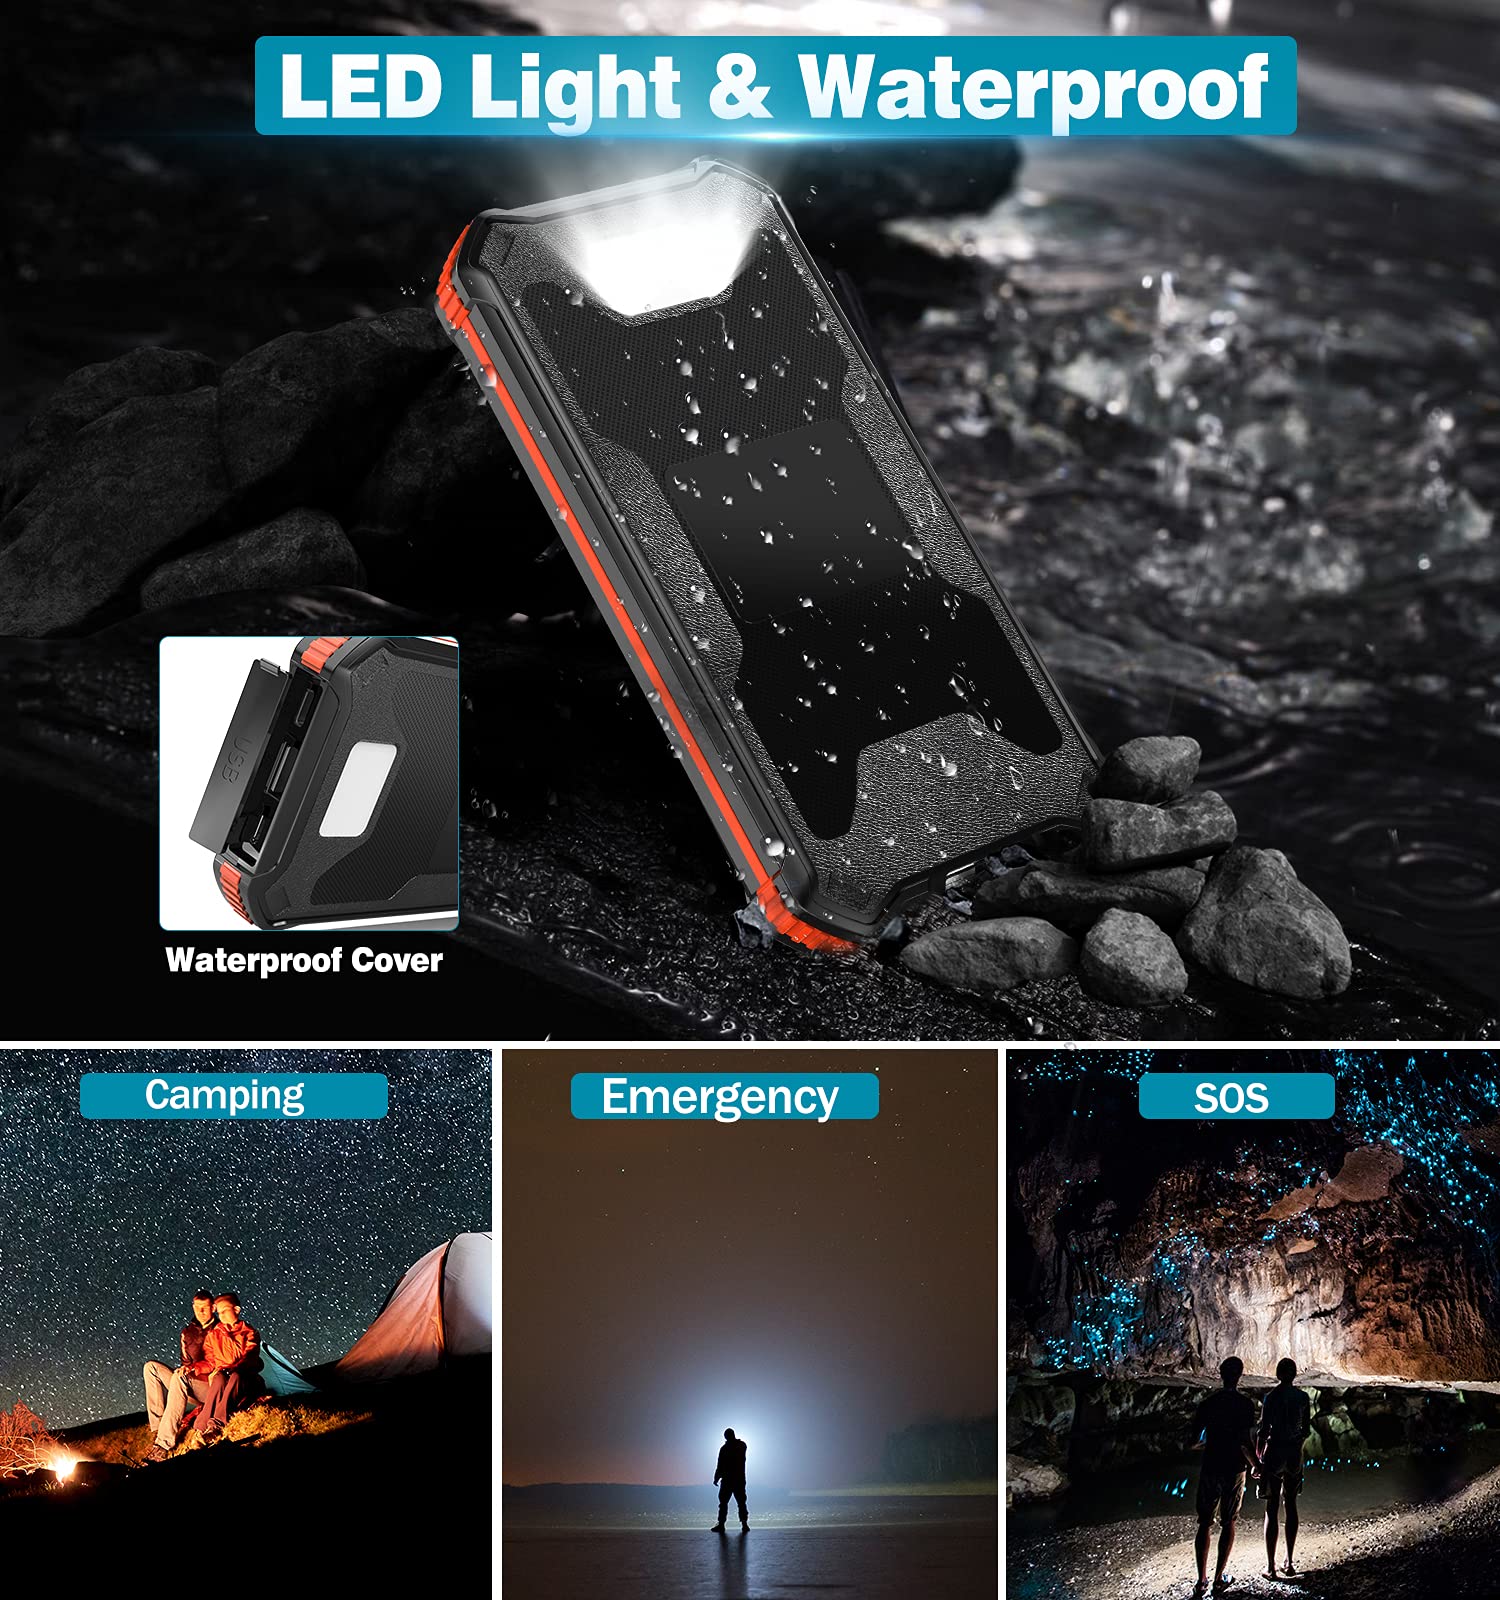 Solar Power Bank 20000mAh Built-in USB B & Type C Cables, Damipow Solar Charger External High Capacity Battery Pack with 3 Outputs, 2 Inputs, LED Flashlights Compatible All Cell Phones, IOS, Android